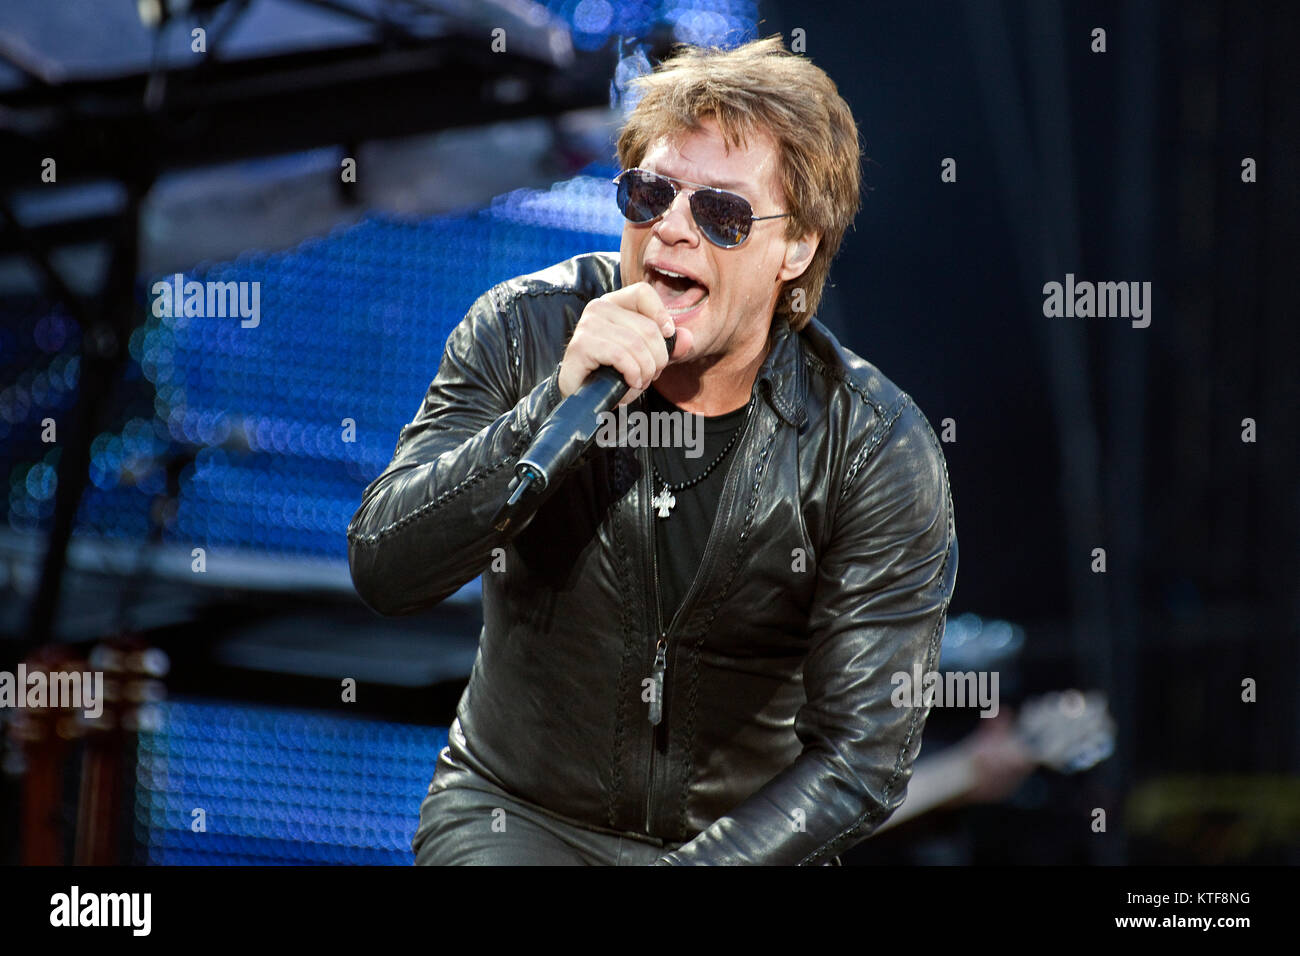 The American rock band Bon Jovi performs a live concert at Ullevaal Stadion in Oslo. Here lead singer and musician Jon Bon Jovi is seen live on stage. Norway, 15/06 2011. Stock Photo